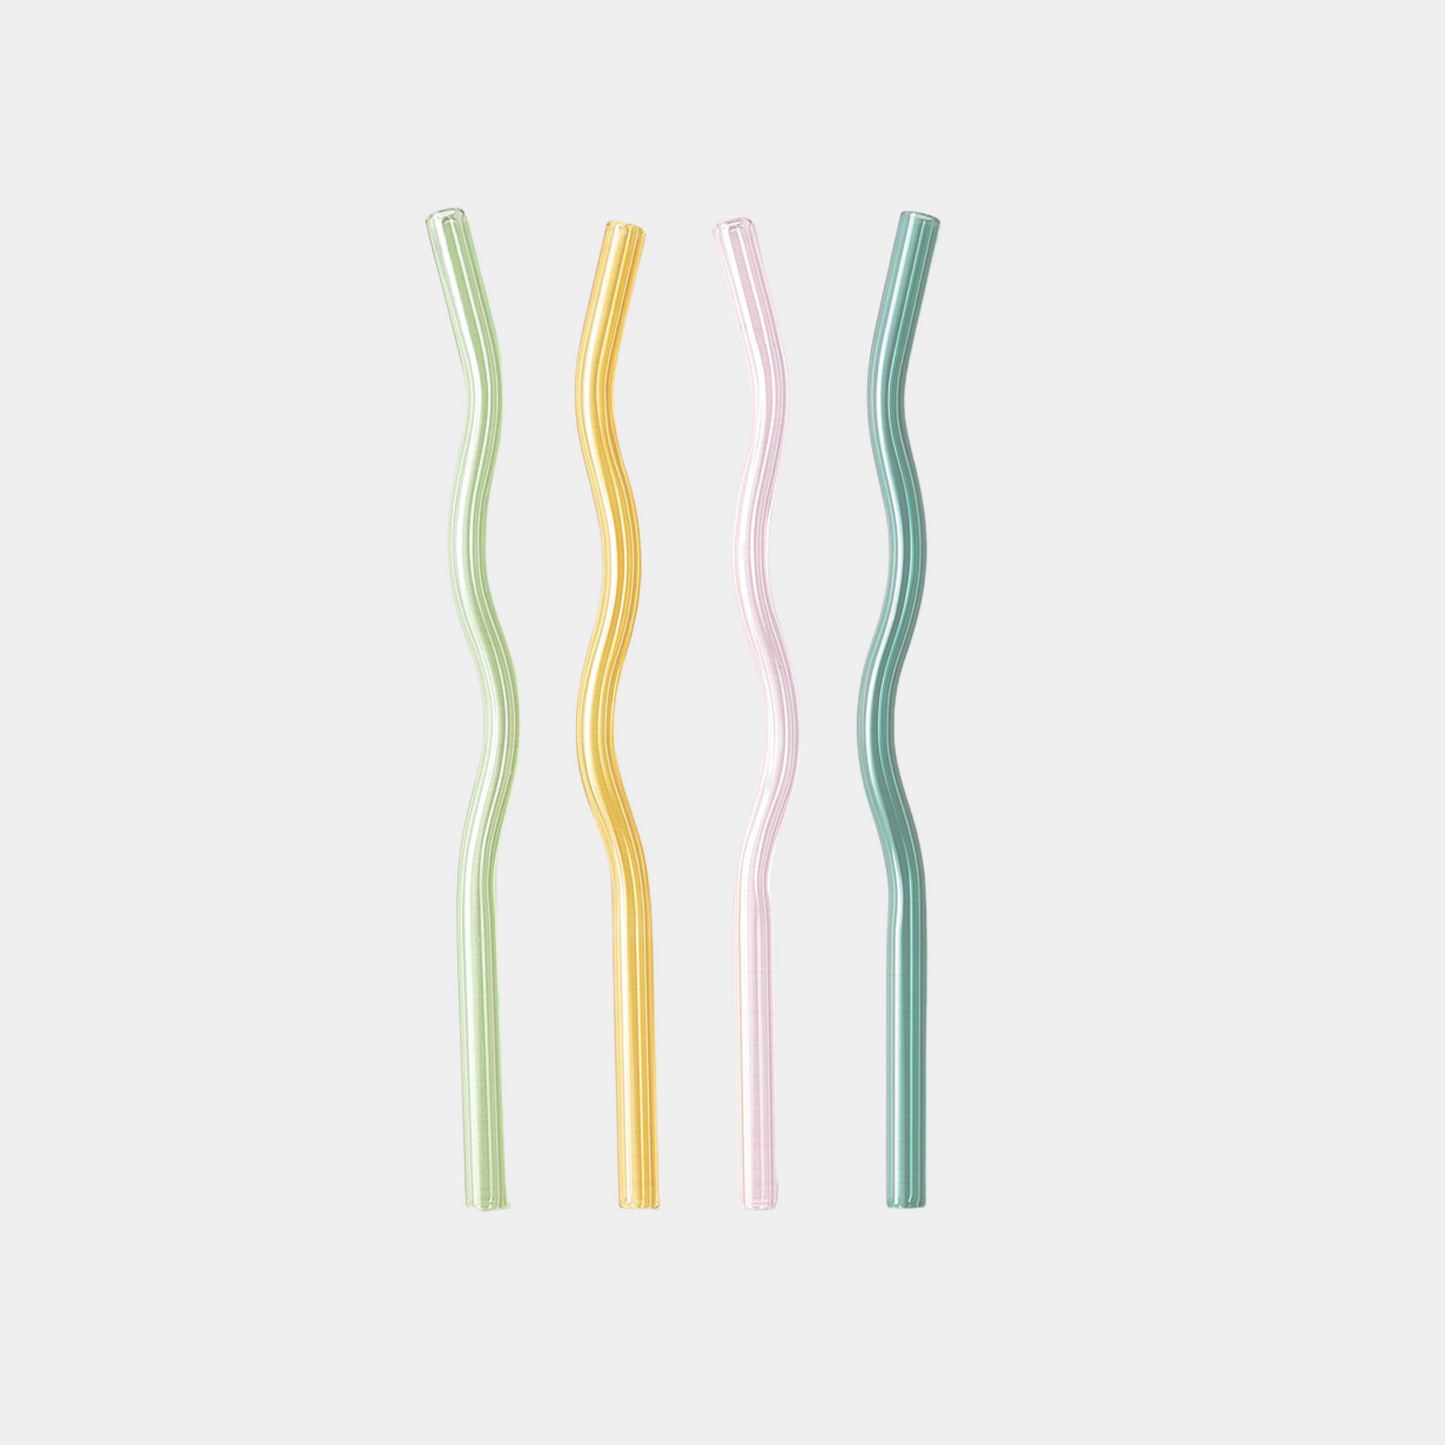 Wavy Glass Straws | Set of 4 | Colorful 